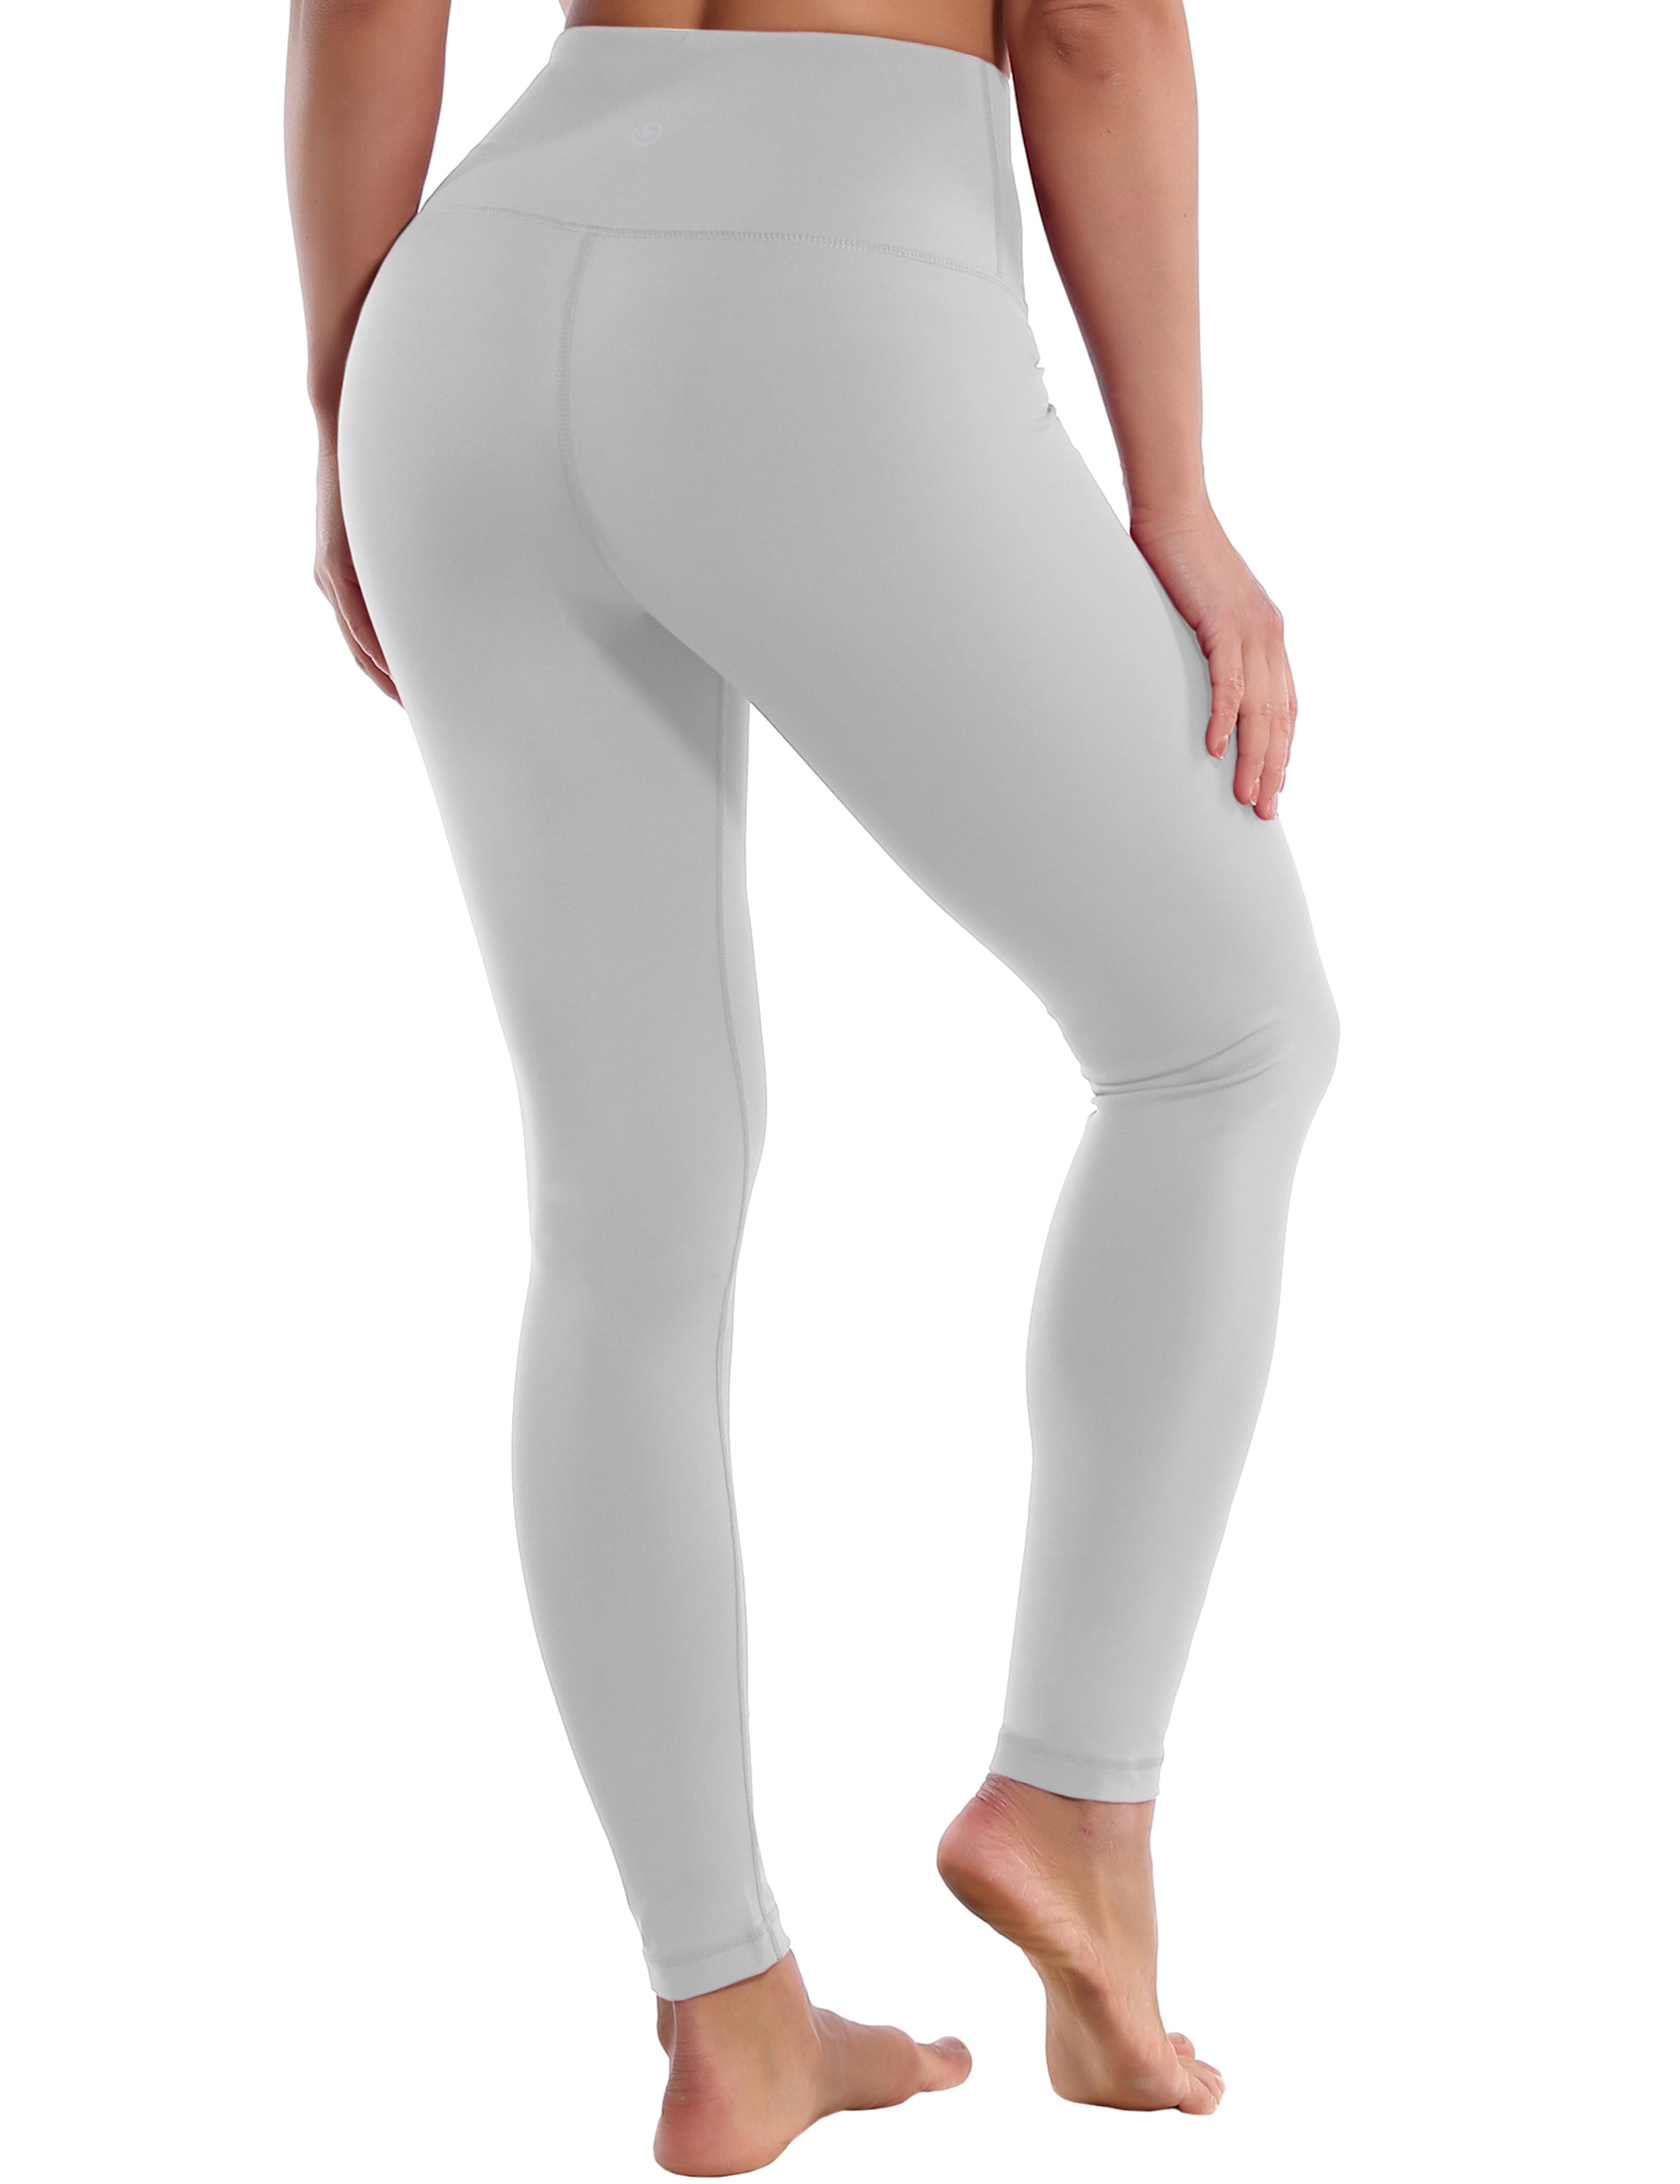 High Waist Gym Pants lightgray 75%Nylon/25%Spandex Fabric doesn't attract lint easily 4-way stretch No see-through Moisture-wicking Tummy control Inner pocket Four lengths